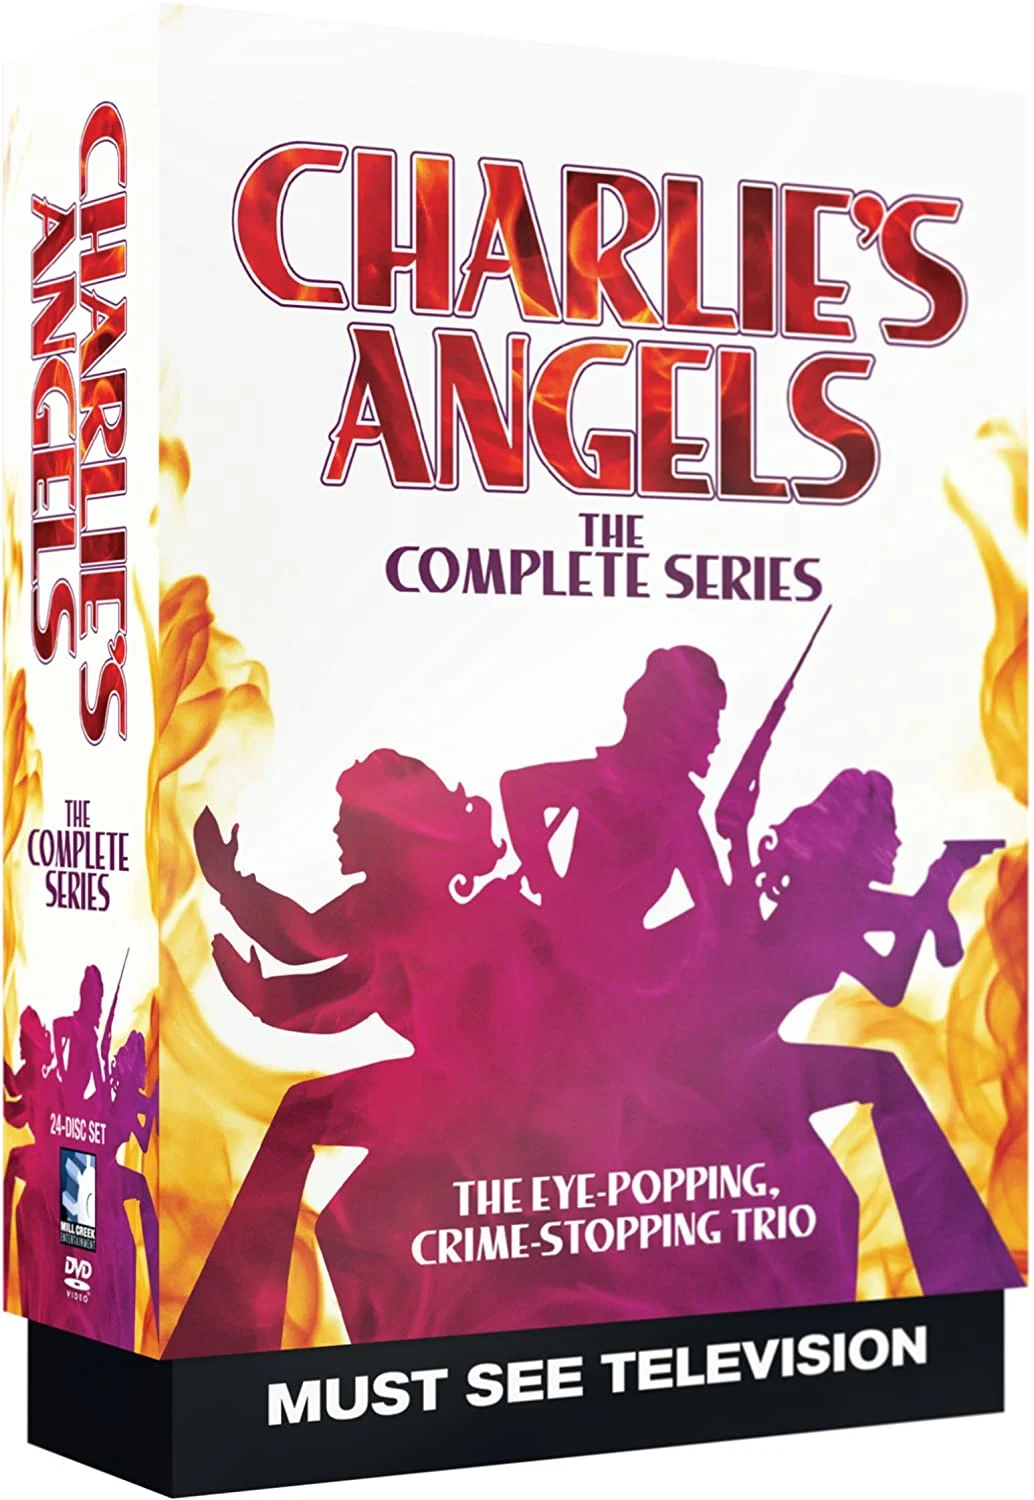 Charlie’s Angels: The Complete Series (DVD) on MovieShack